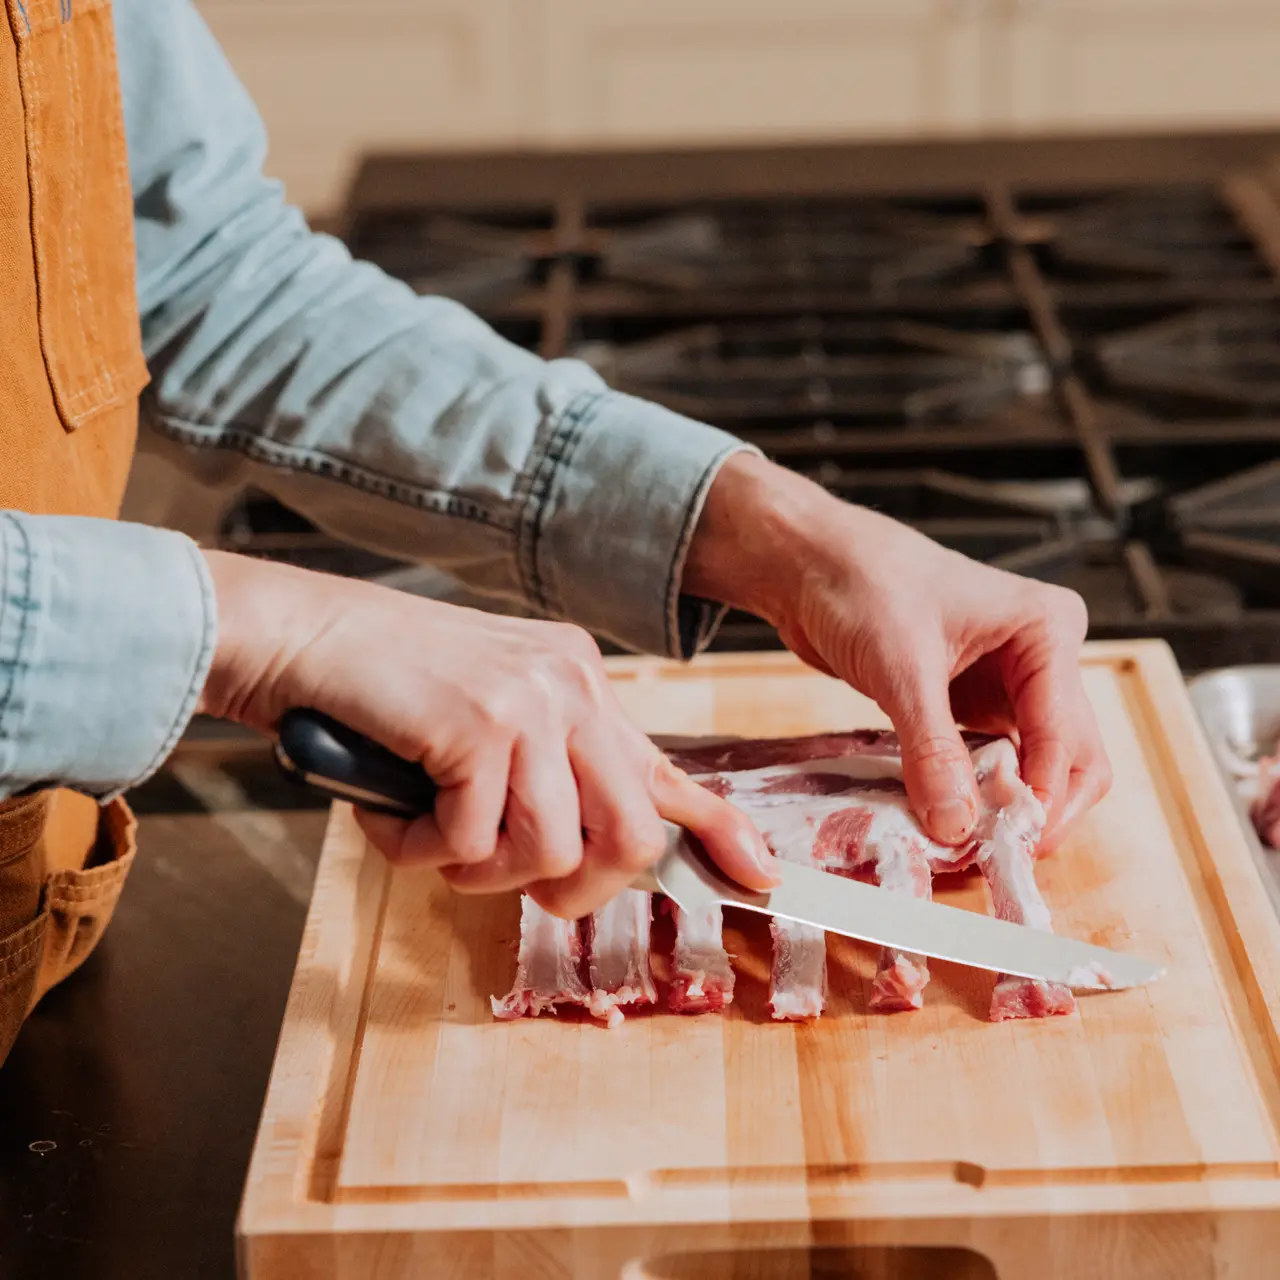 A person wearing an apron is cutting raw meat on a wooden chopping board.